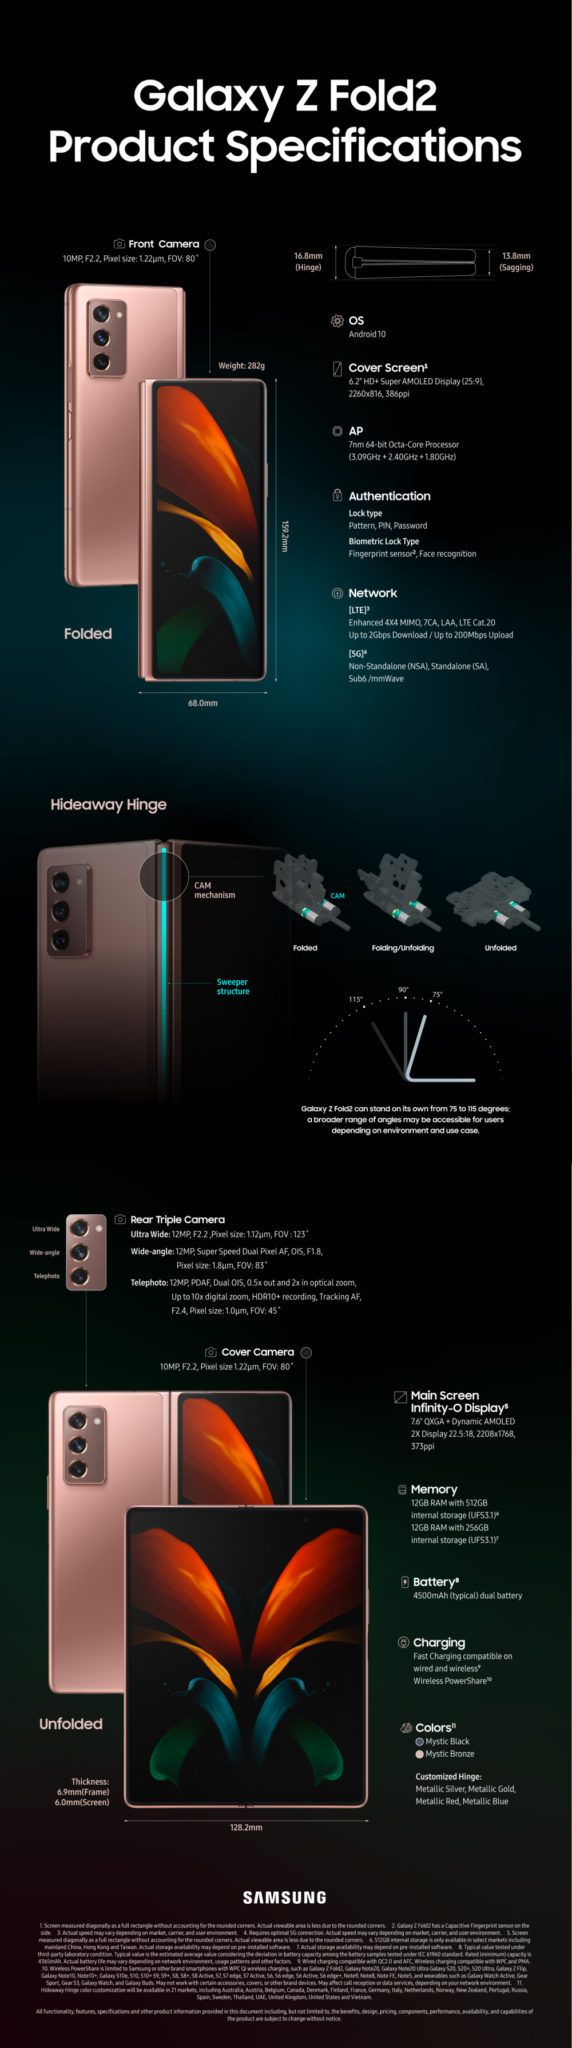 [Infographic] Galaxy Z Fold2: Samsung Takes Foldable Innovation to New Heights